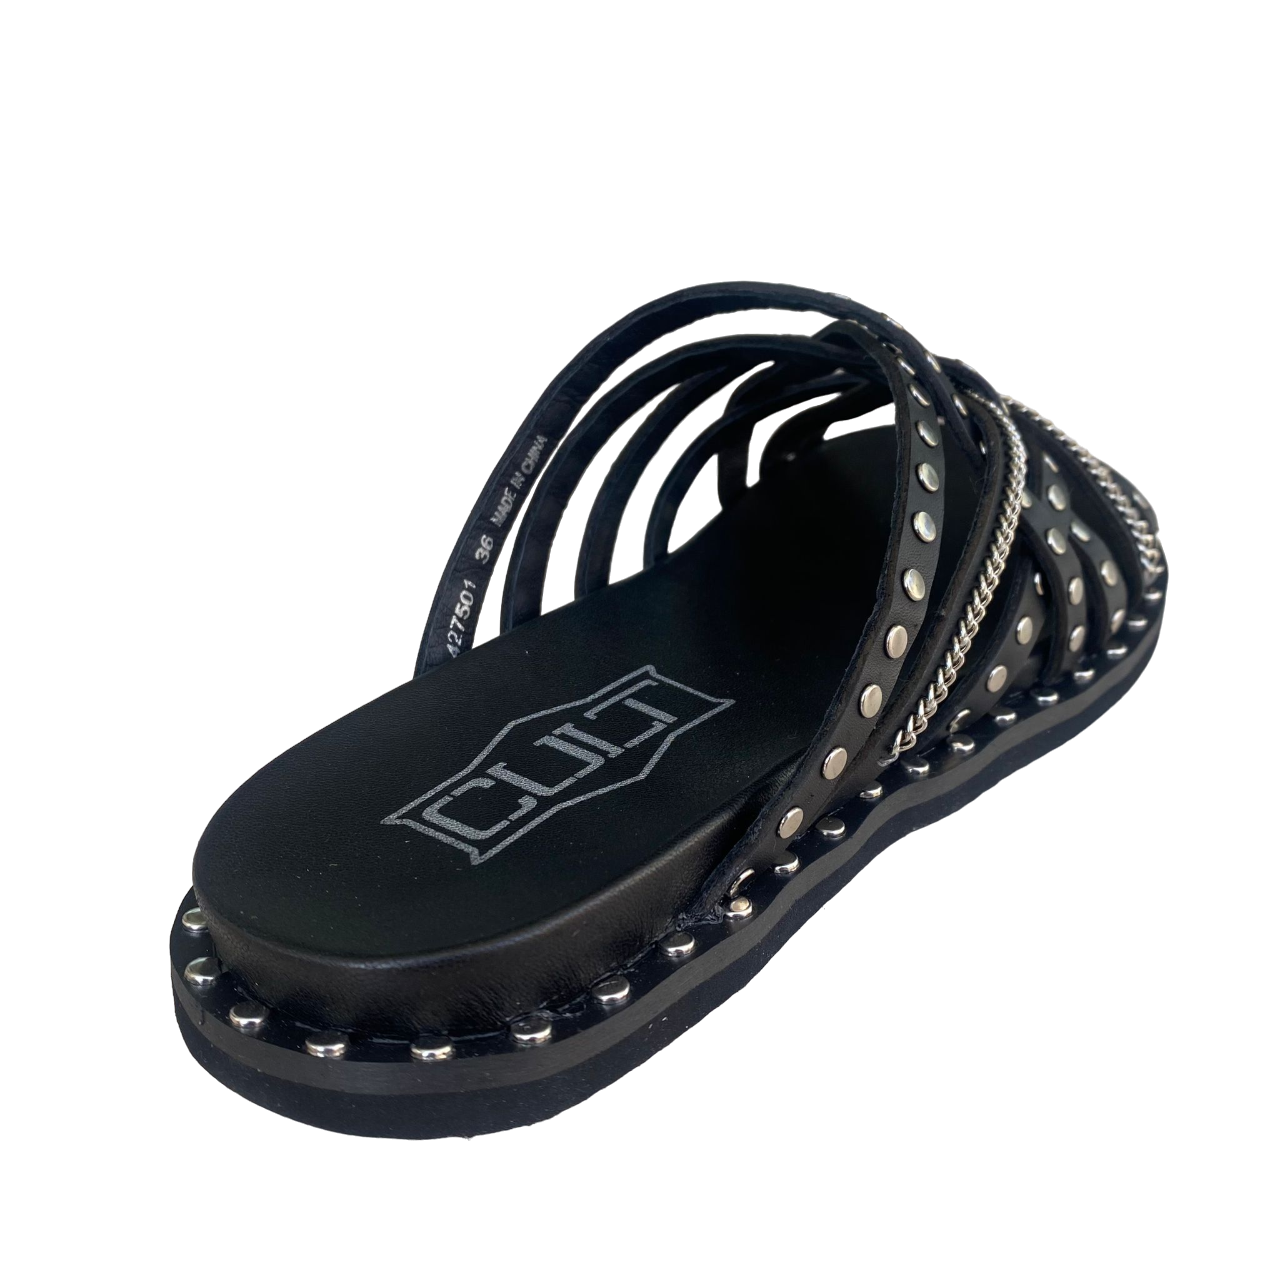 Cult Slipper with woven bands for women Roshelle 4275 CLW427501 black